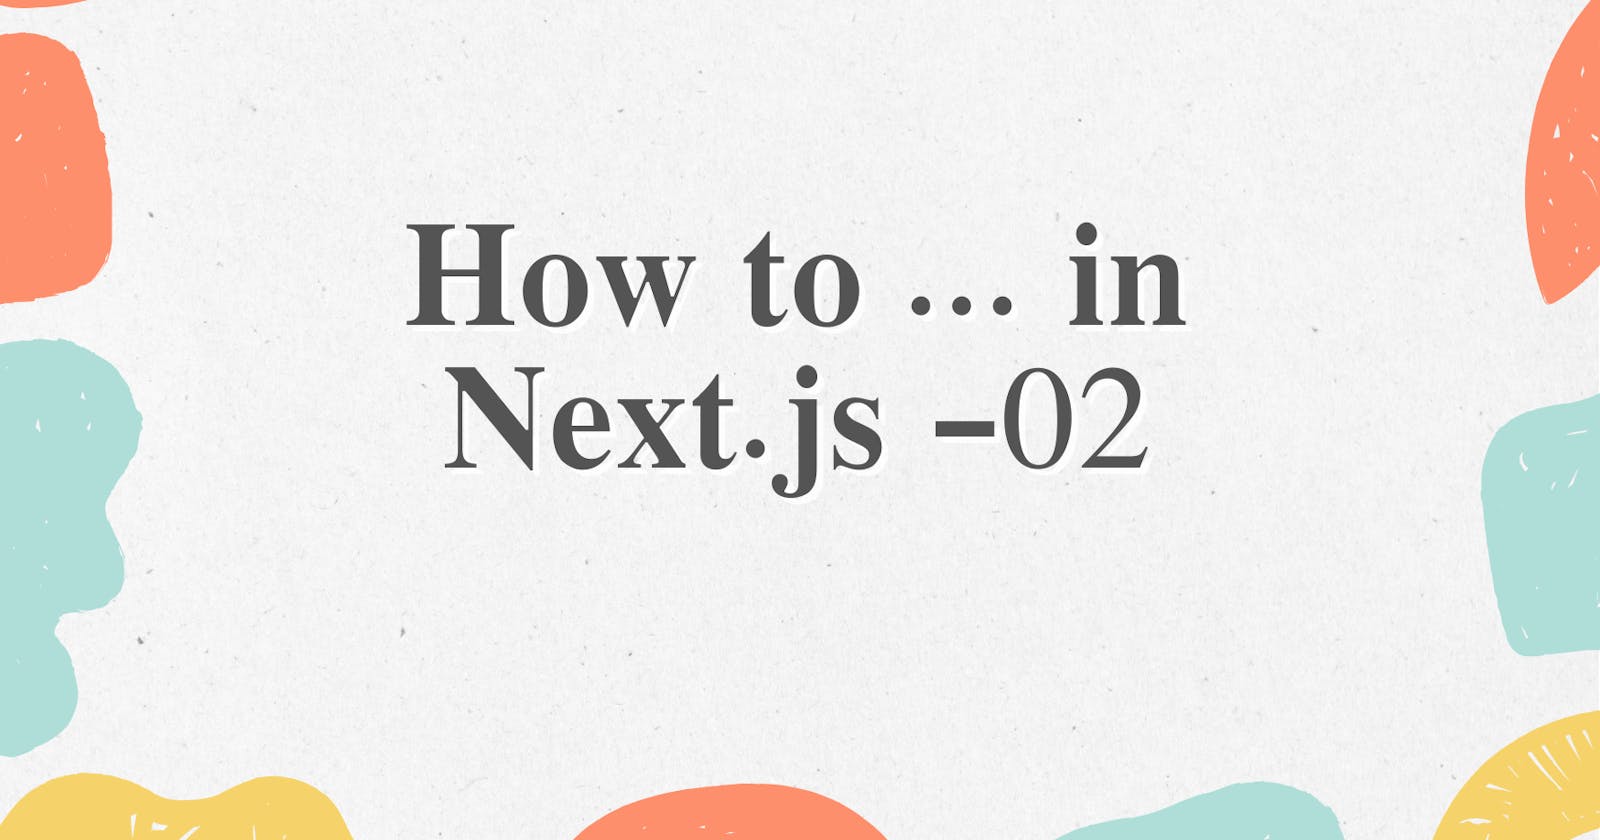 How to ... in Next.js -02